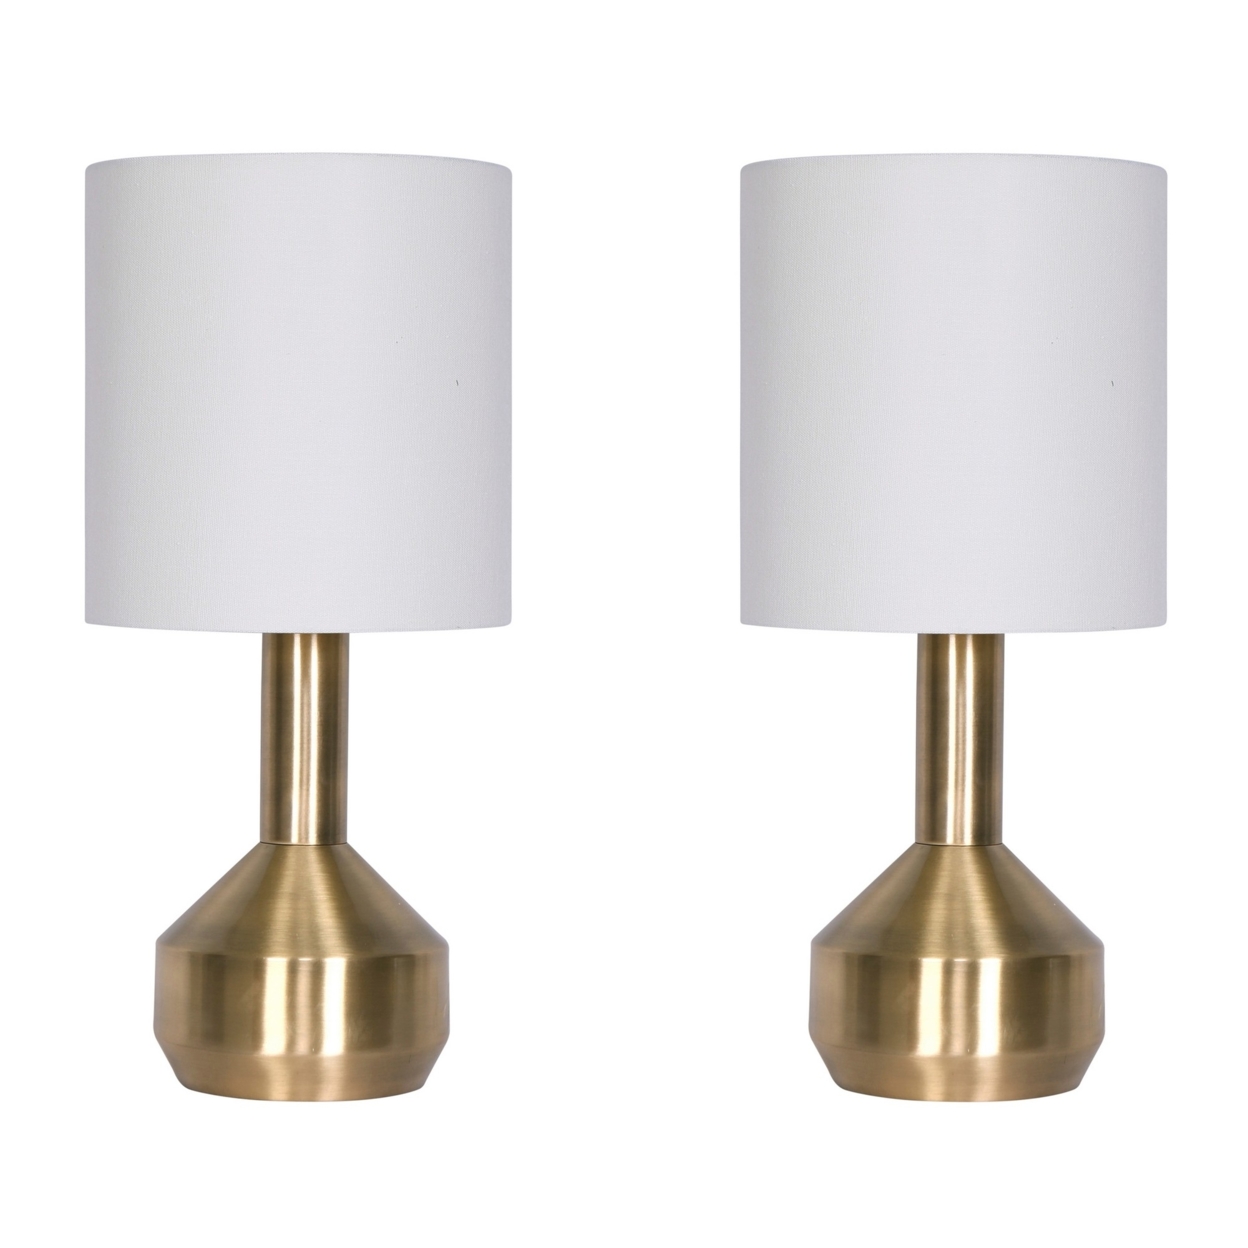 24 Inch Set Of 2 Modern Table Lamps With Polyester Shade, Bronze Metal Base- Saltoro Sherpi